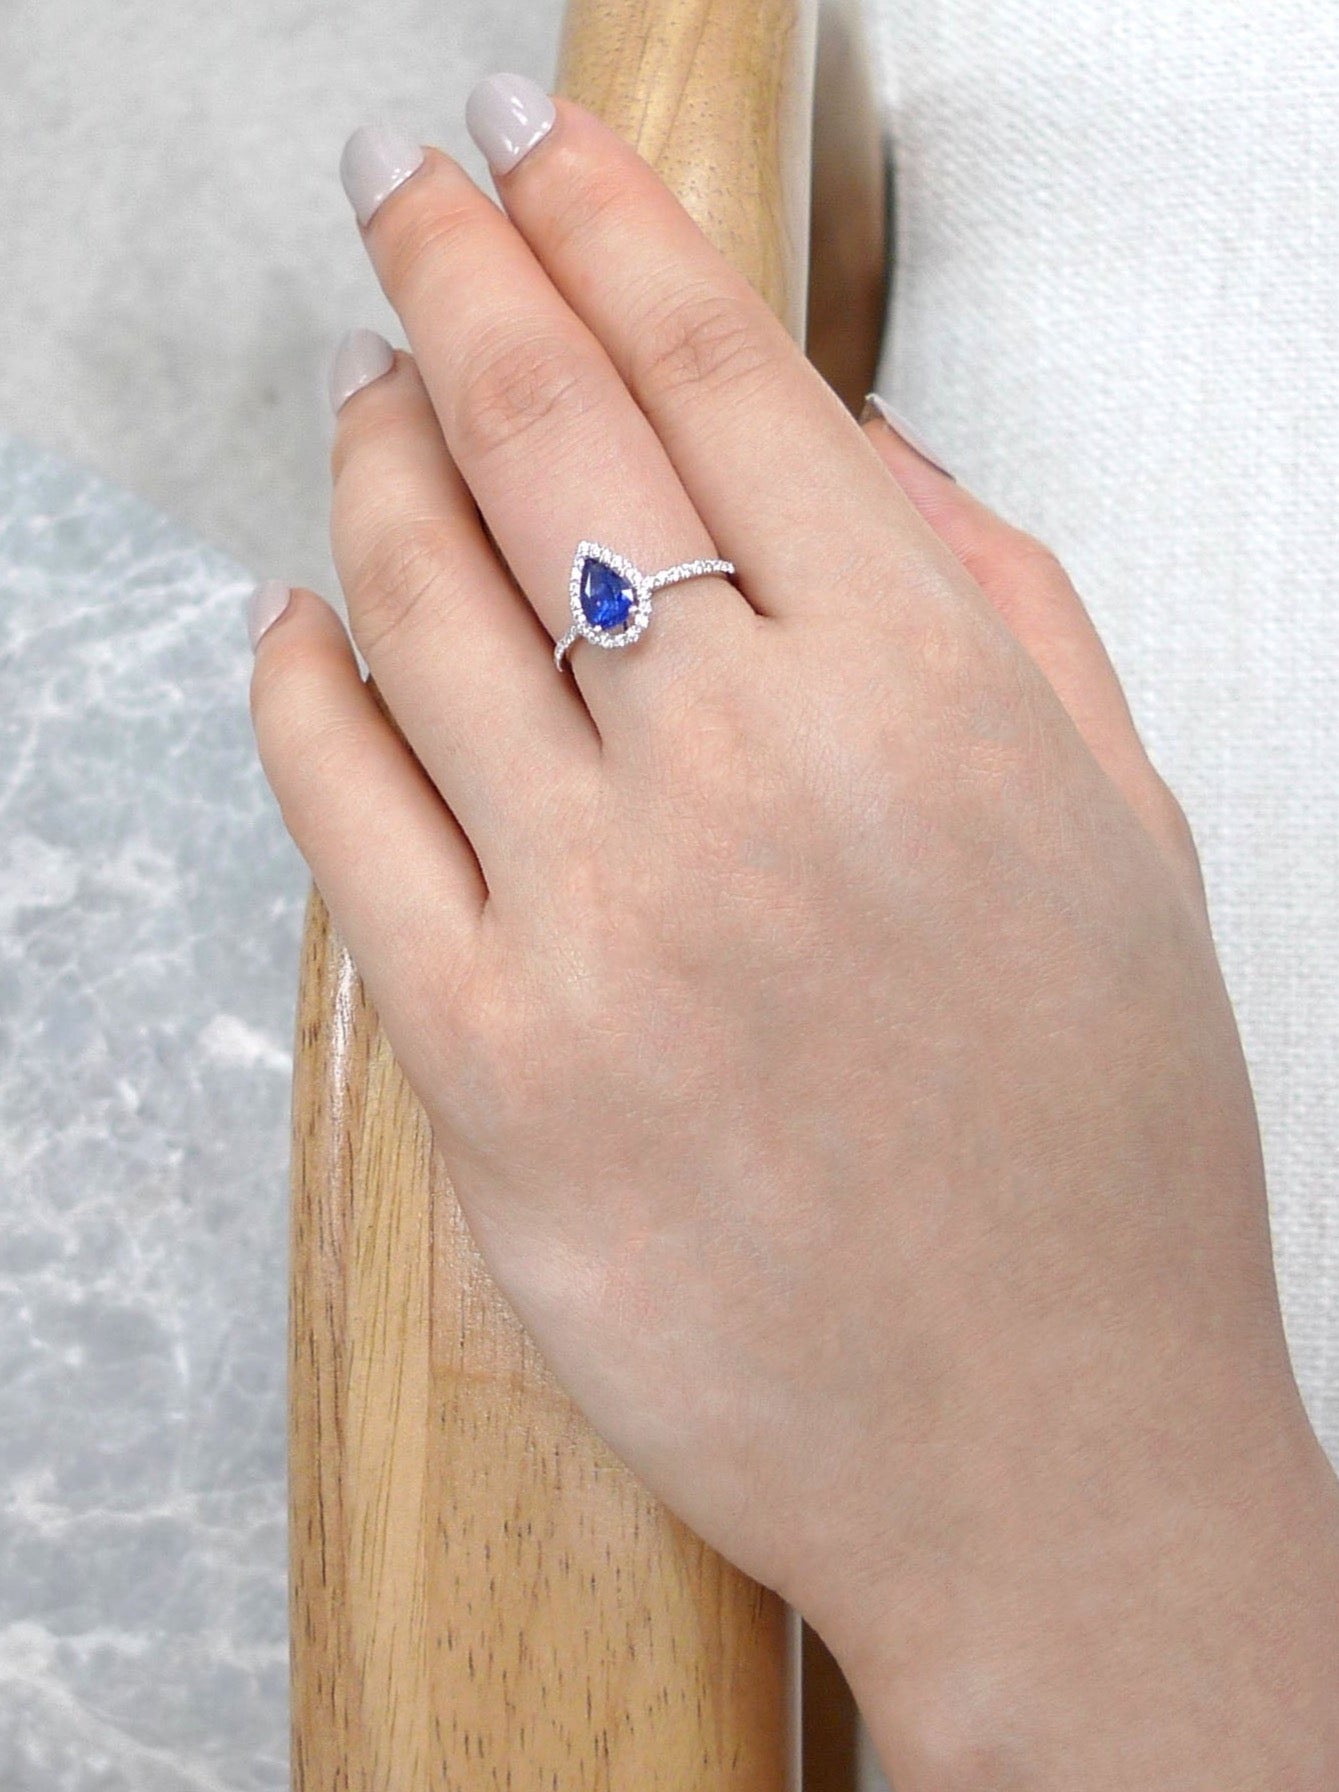 Pear Shaped Blue Sapphire Diamond Ring in White Gold - HN JEWELRY